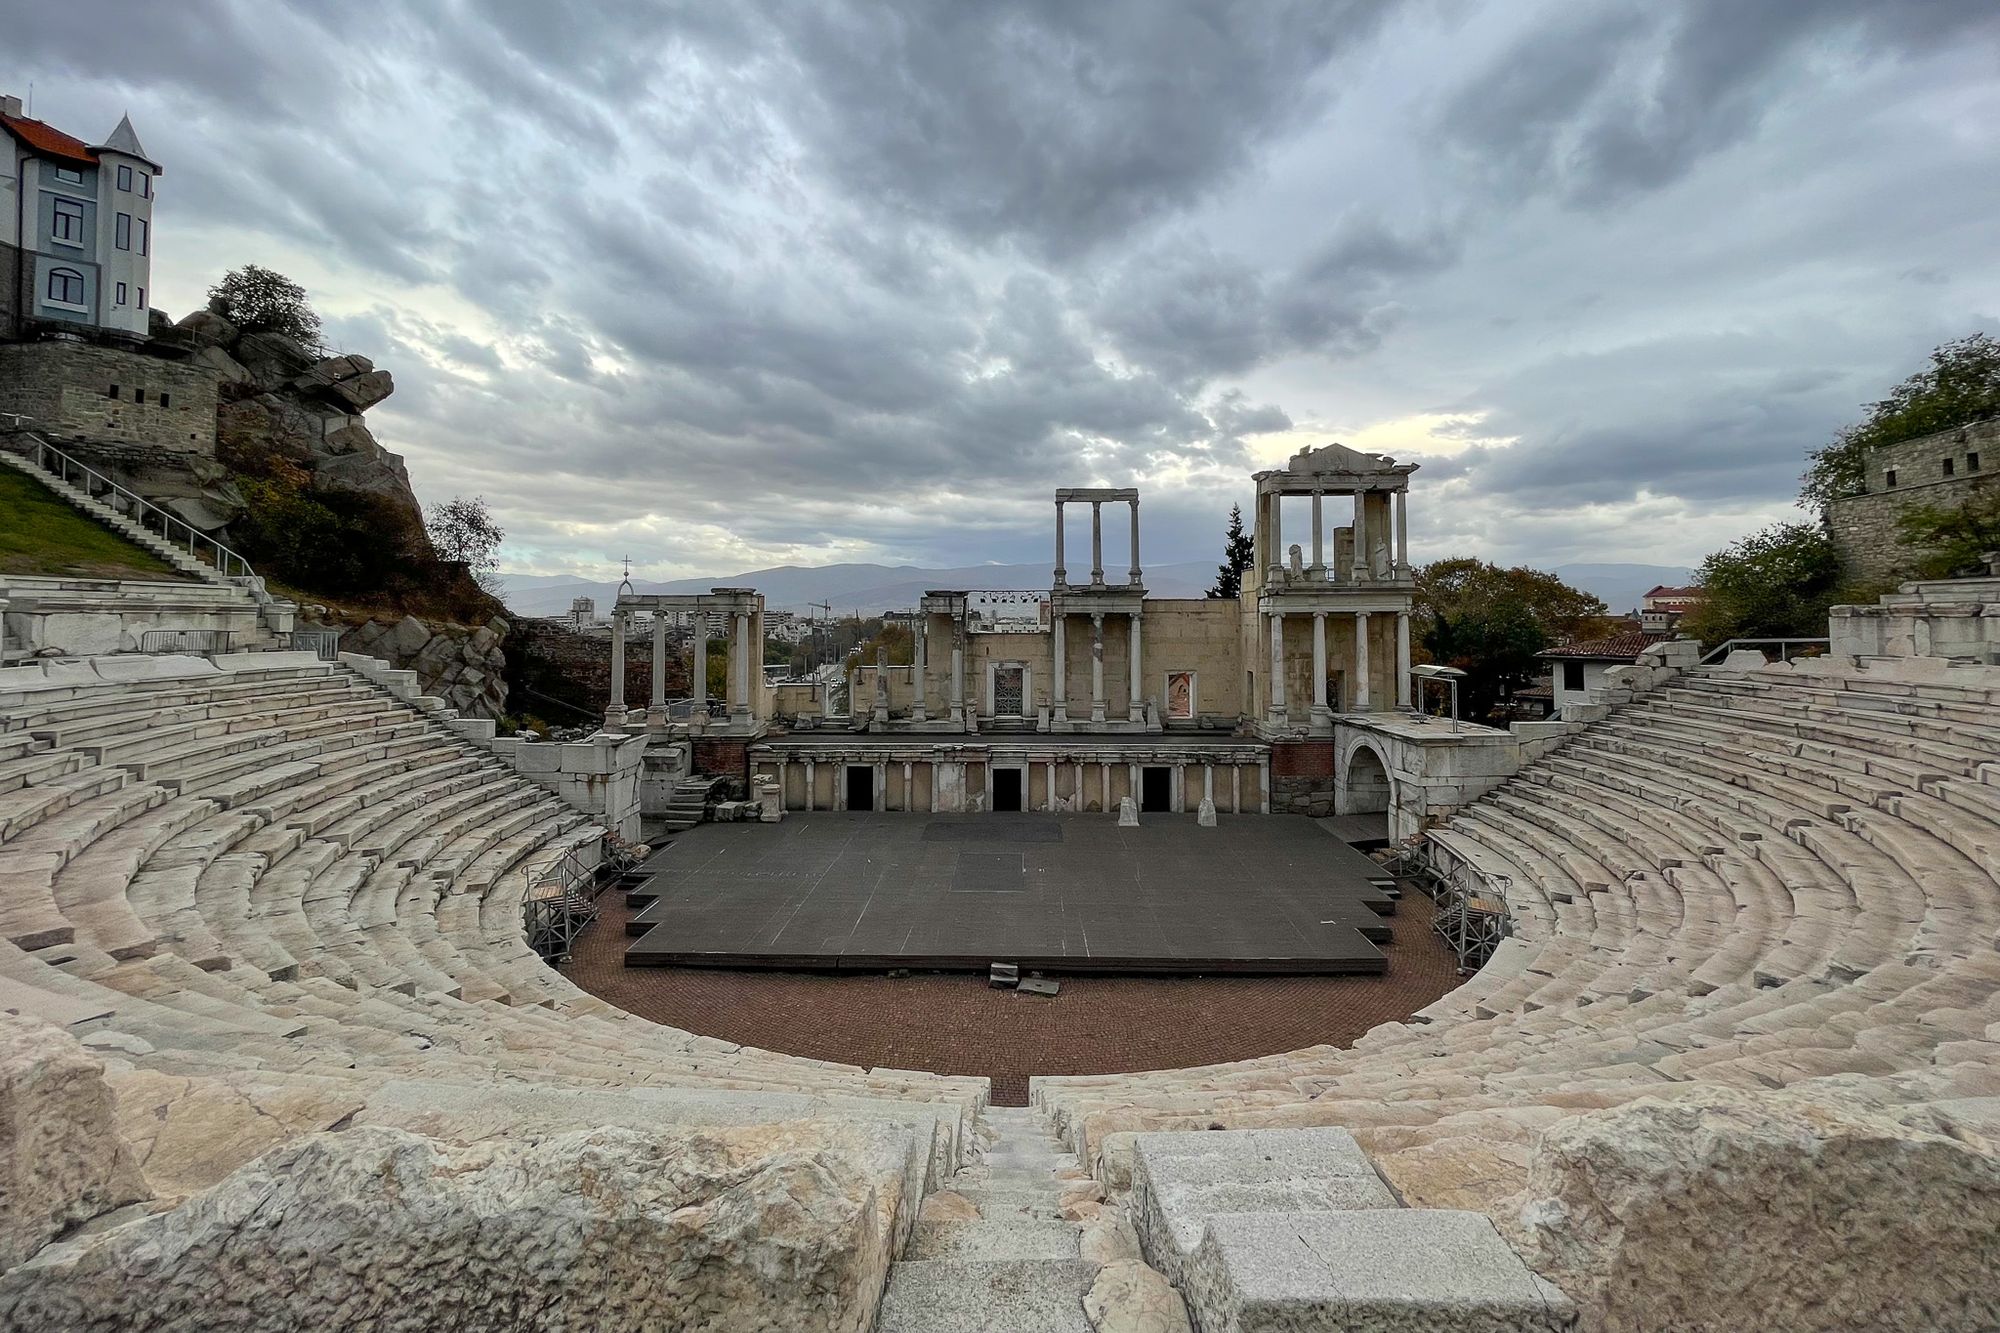 A view from the Roman Theater in Plovdiv, Bulgaria